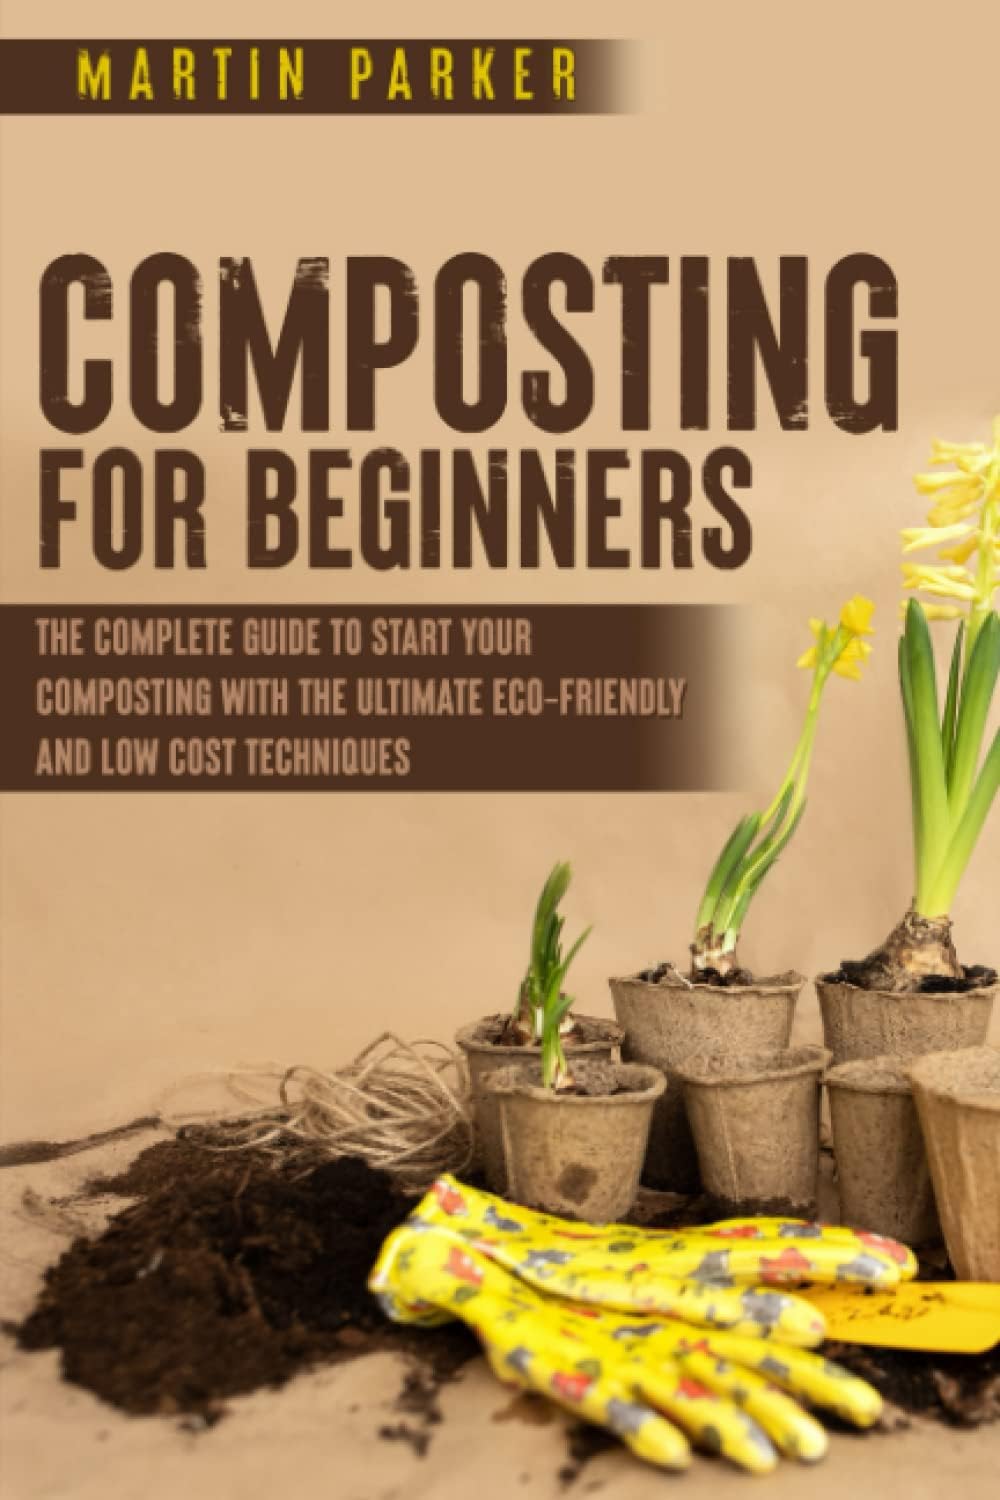 composting for beginners review